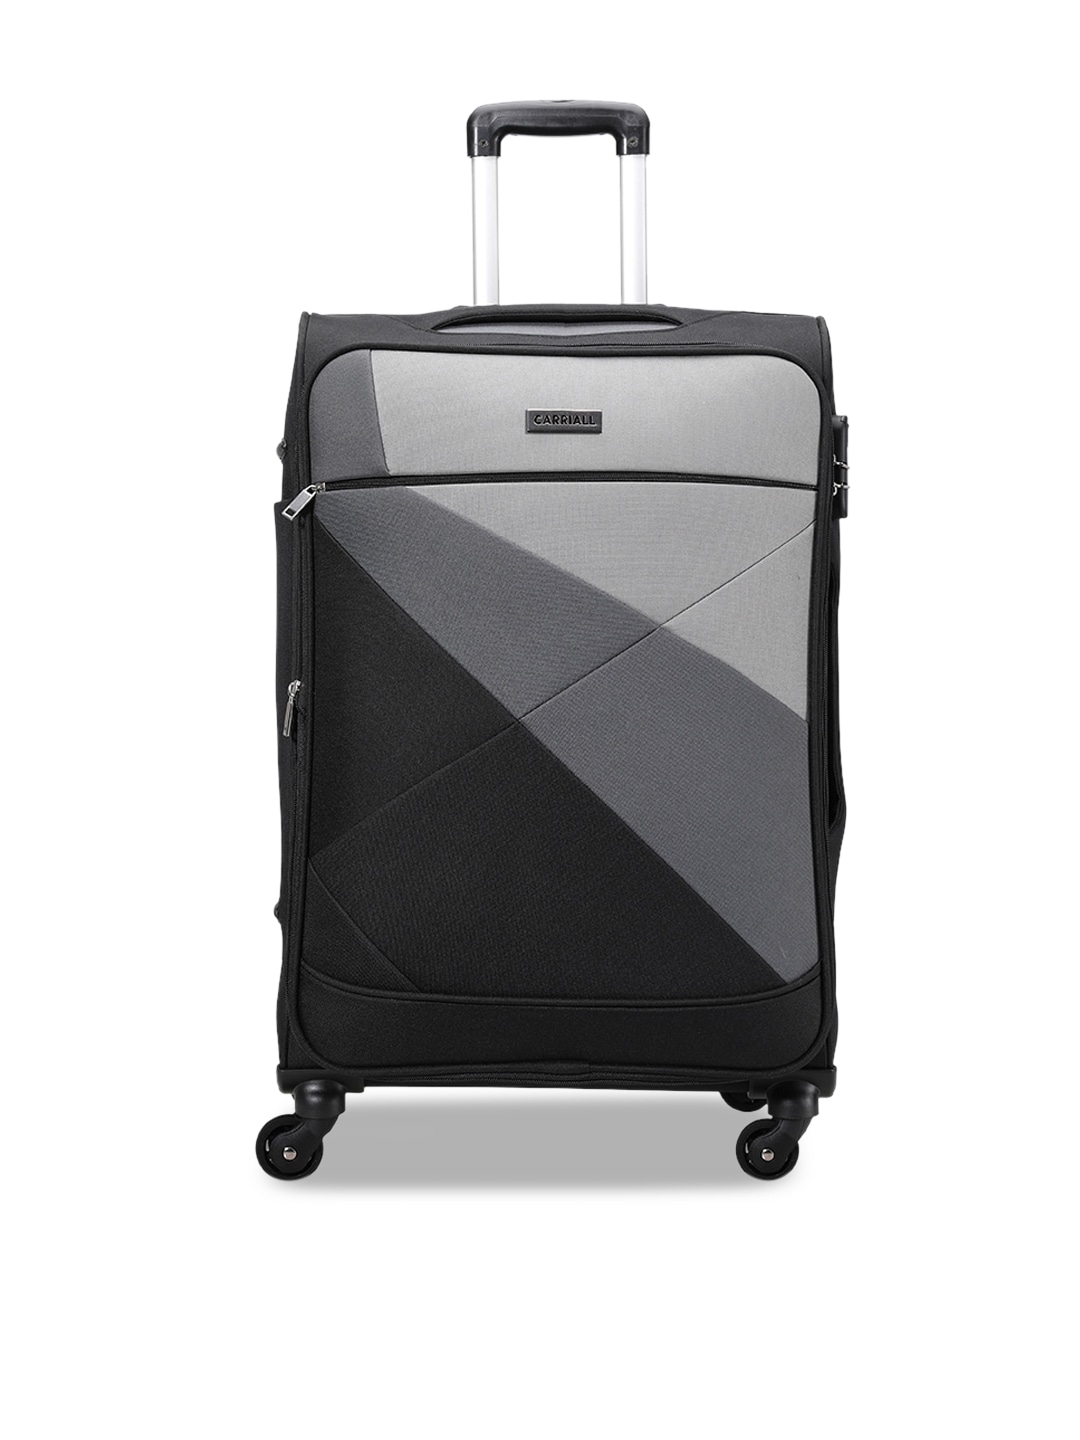 CARRIALL Black Vista Medium-Sized Check-in Trolley Suitcase Price in India